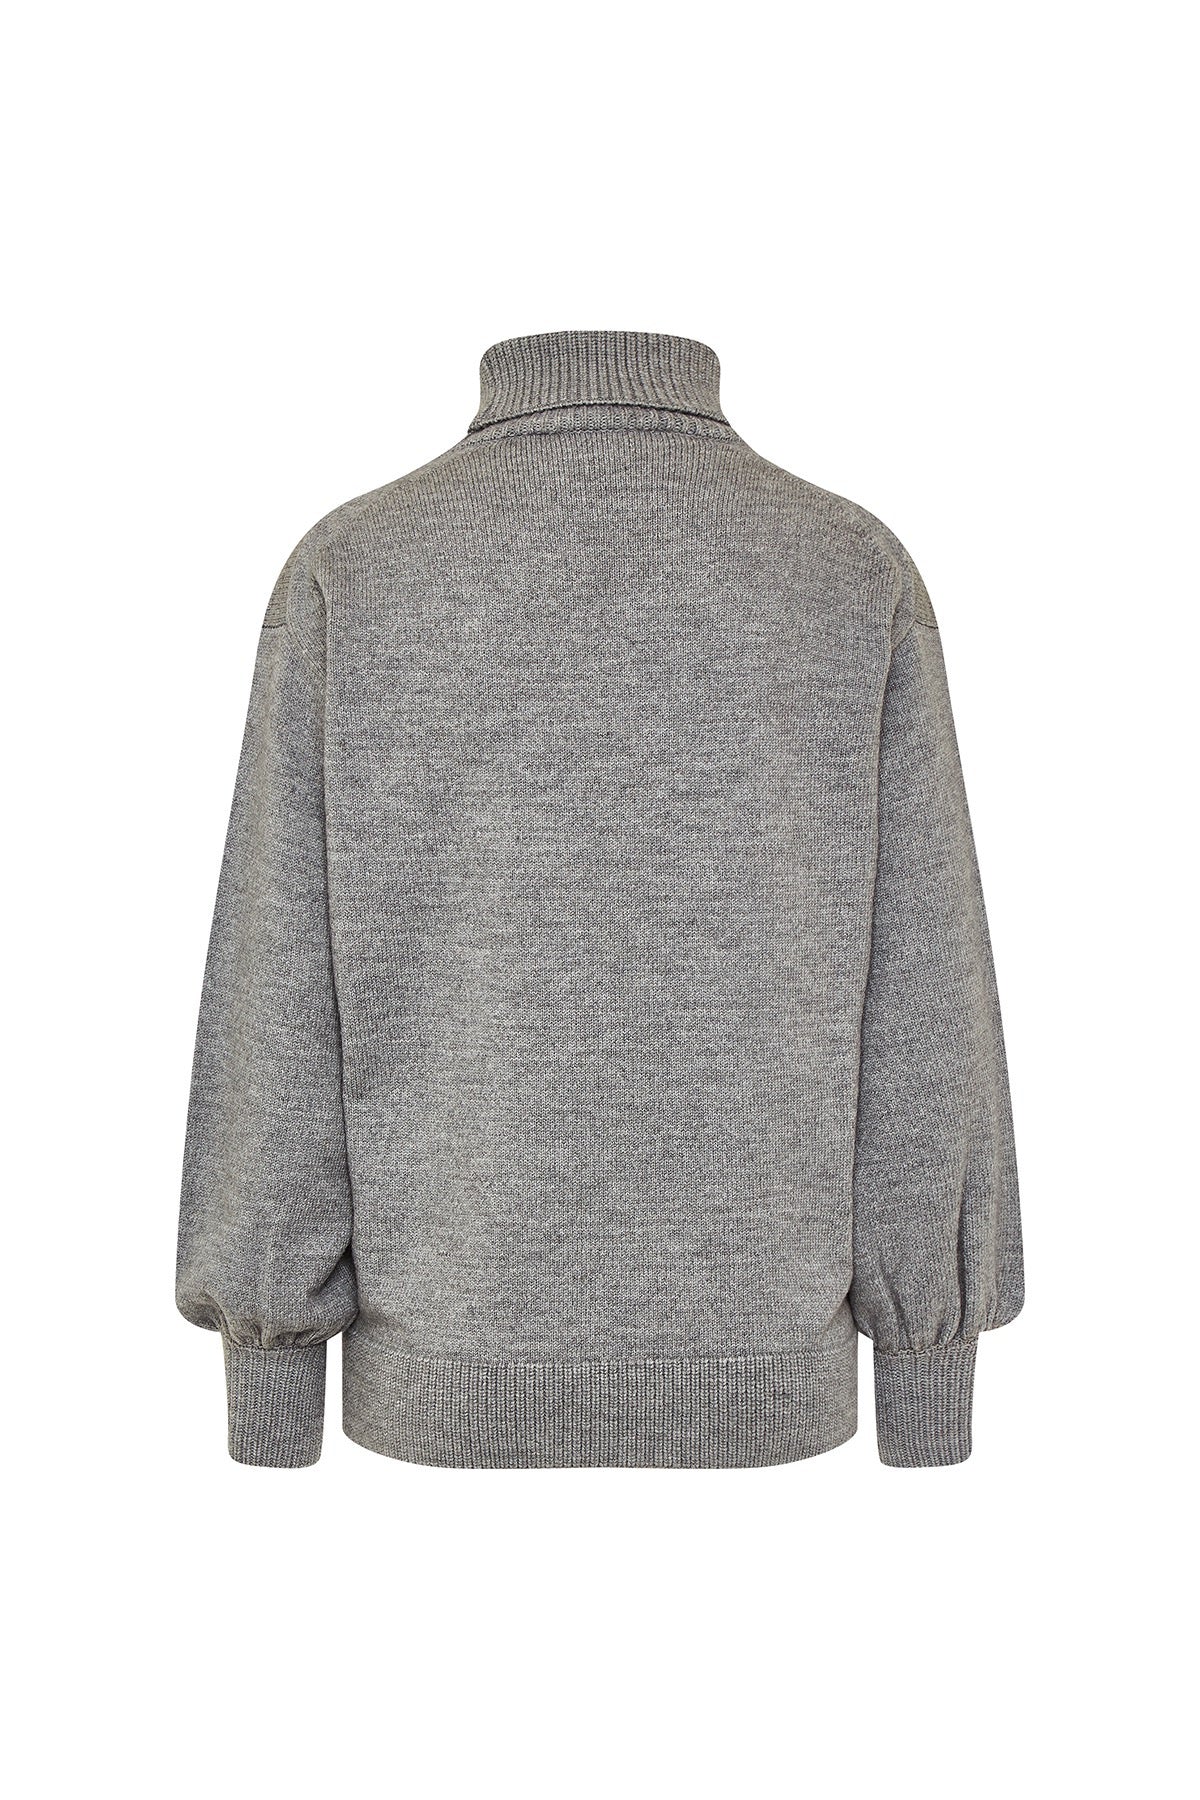 Tone In Tone Embroidered Knit Sweater Grey